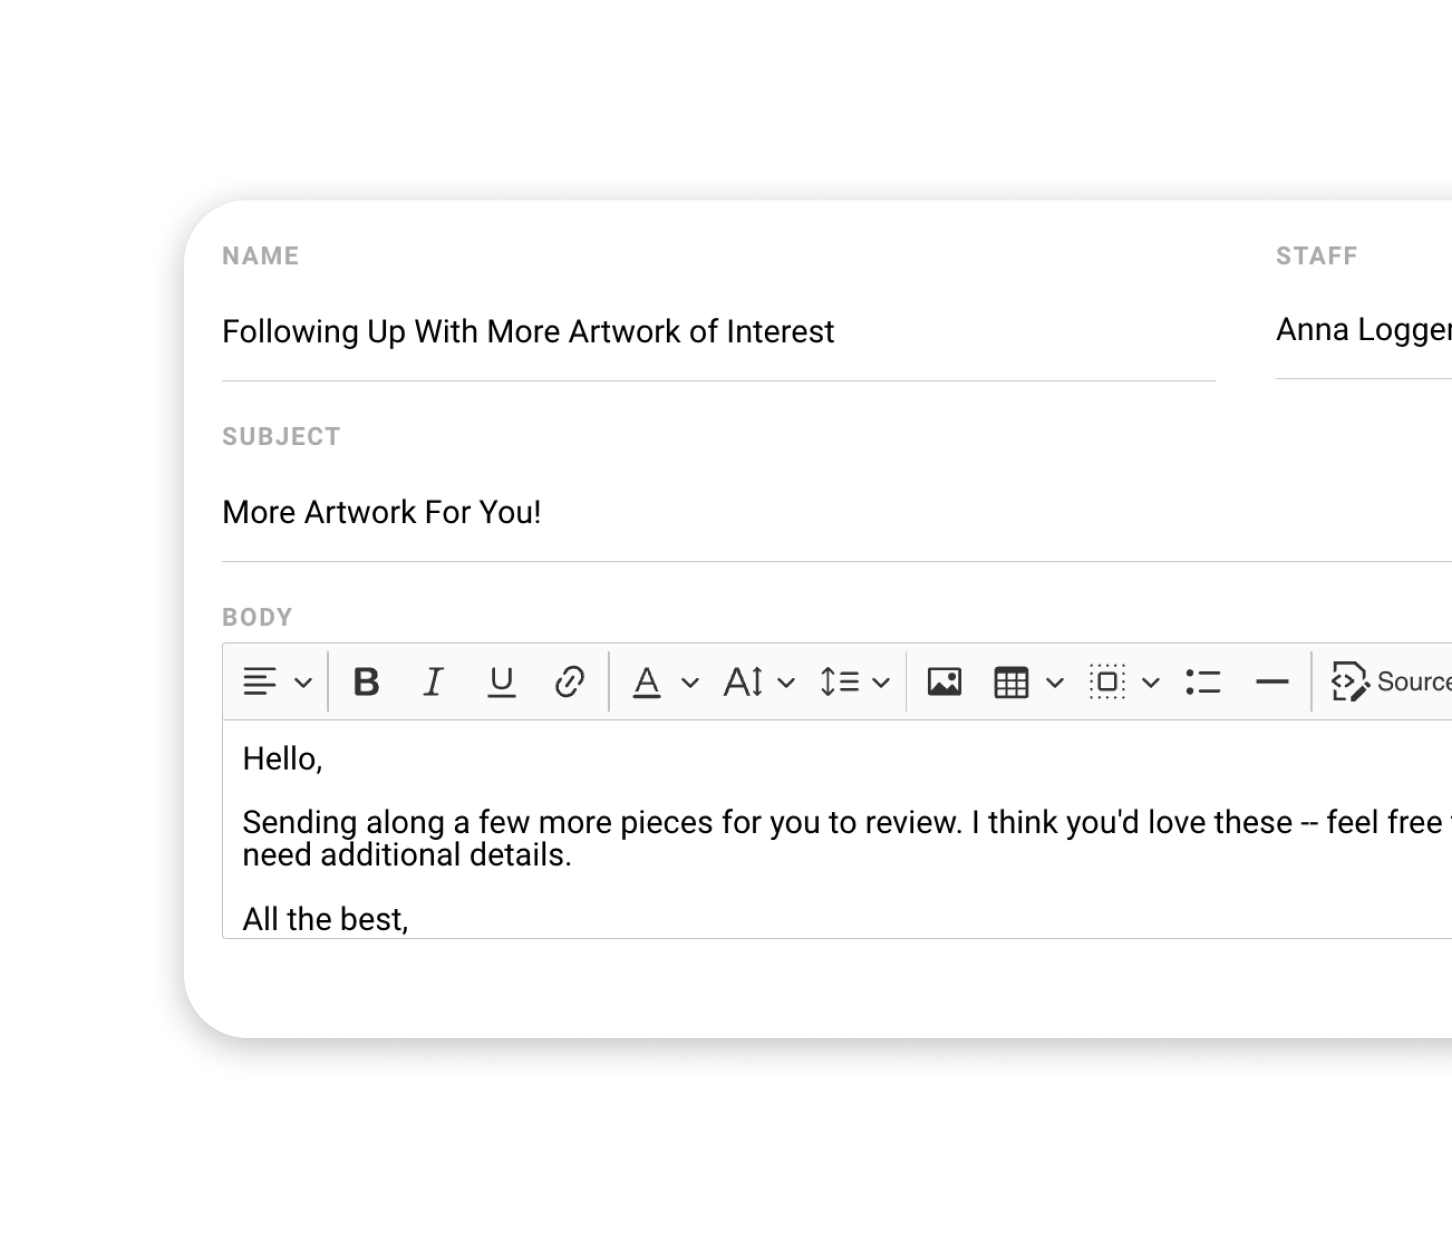 Email Templates - Maximize Your Email Impact with Effective Template Language